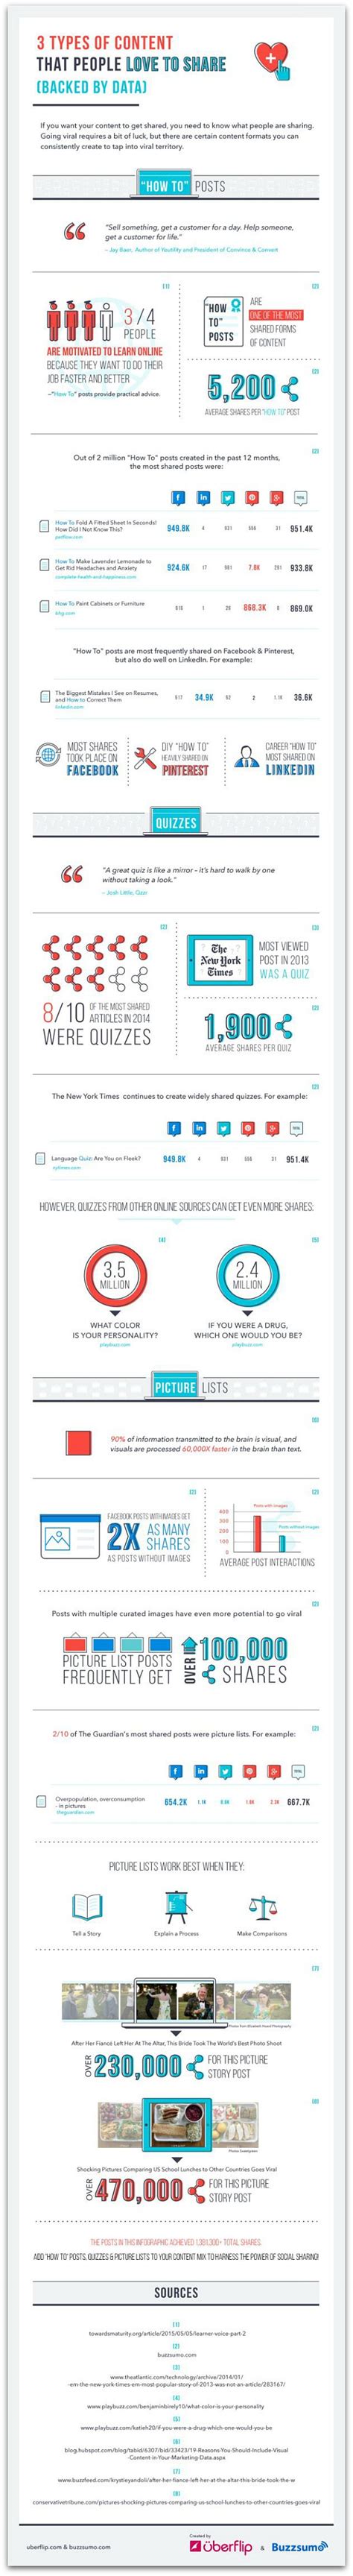 Infographic The 3 Content Types That Get The Most Social Media Shares